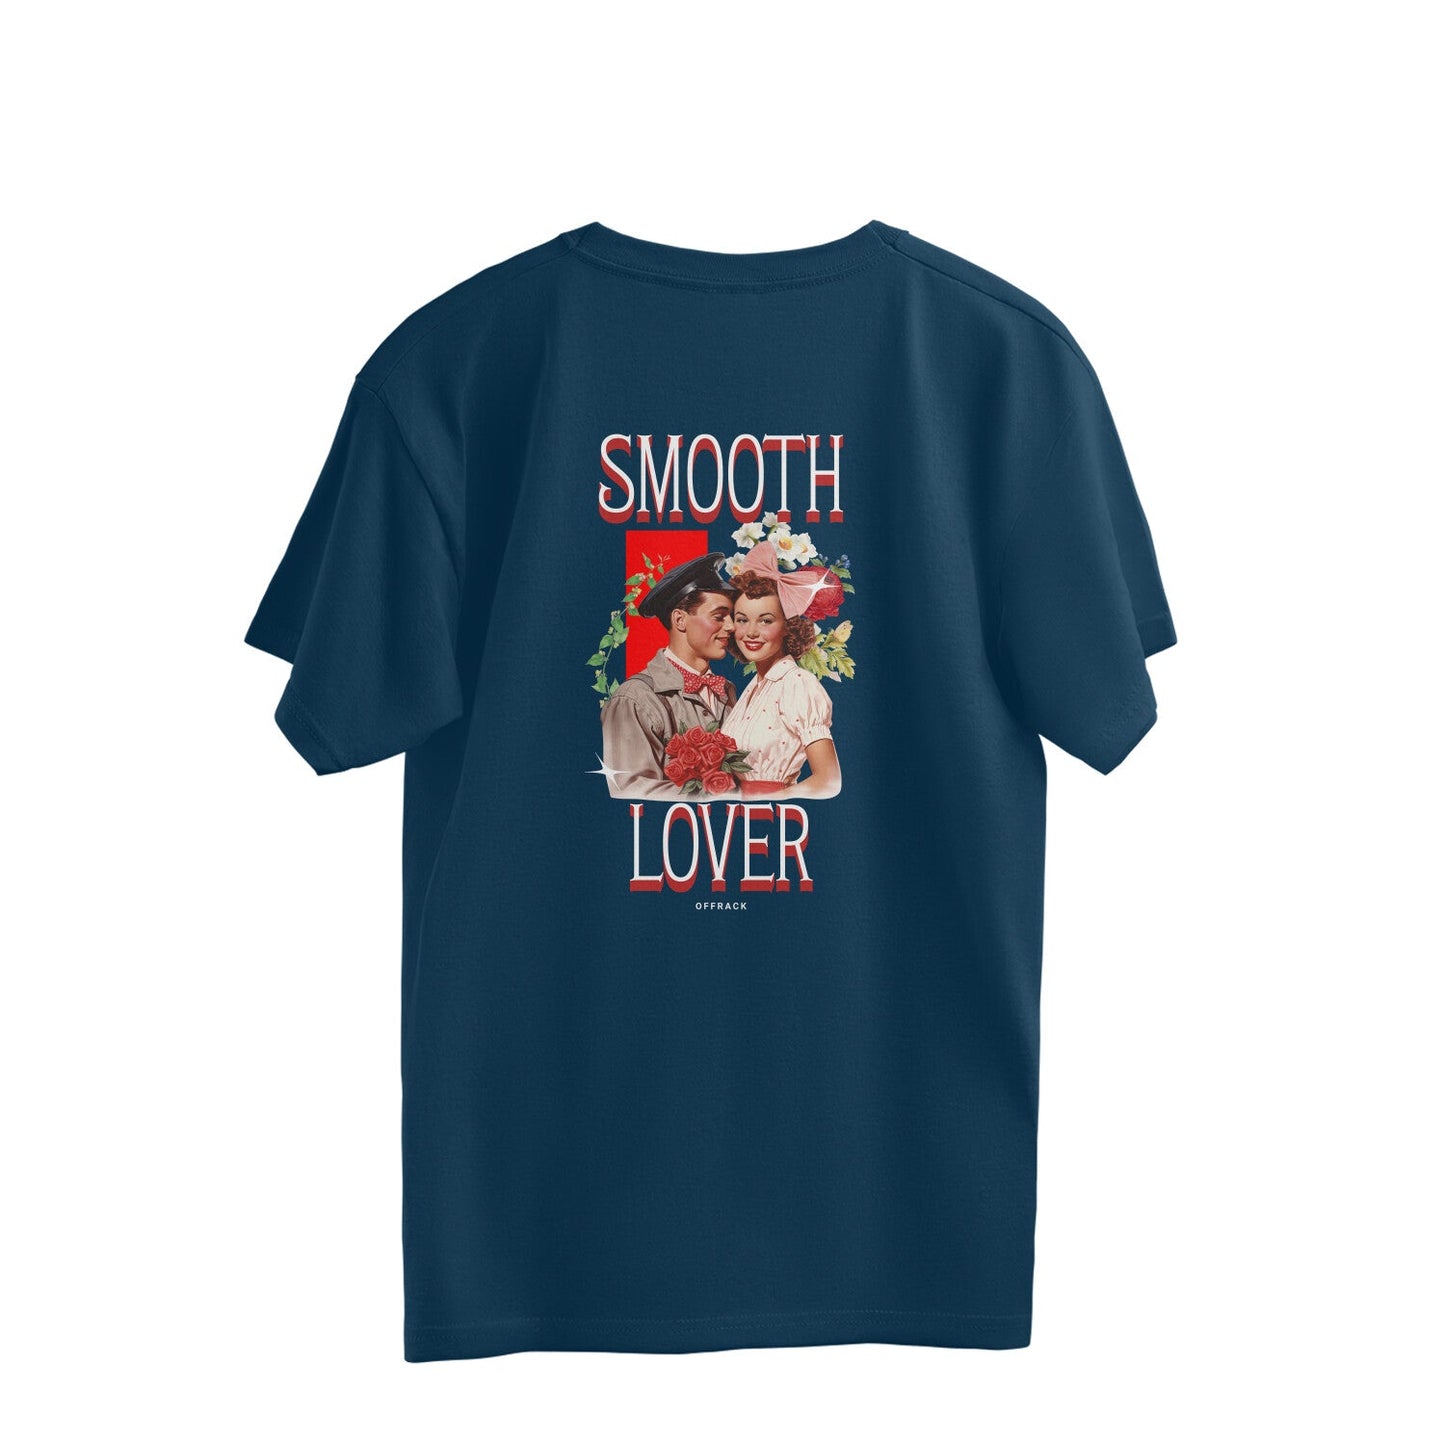 Smooth Lover - Navy Oversized